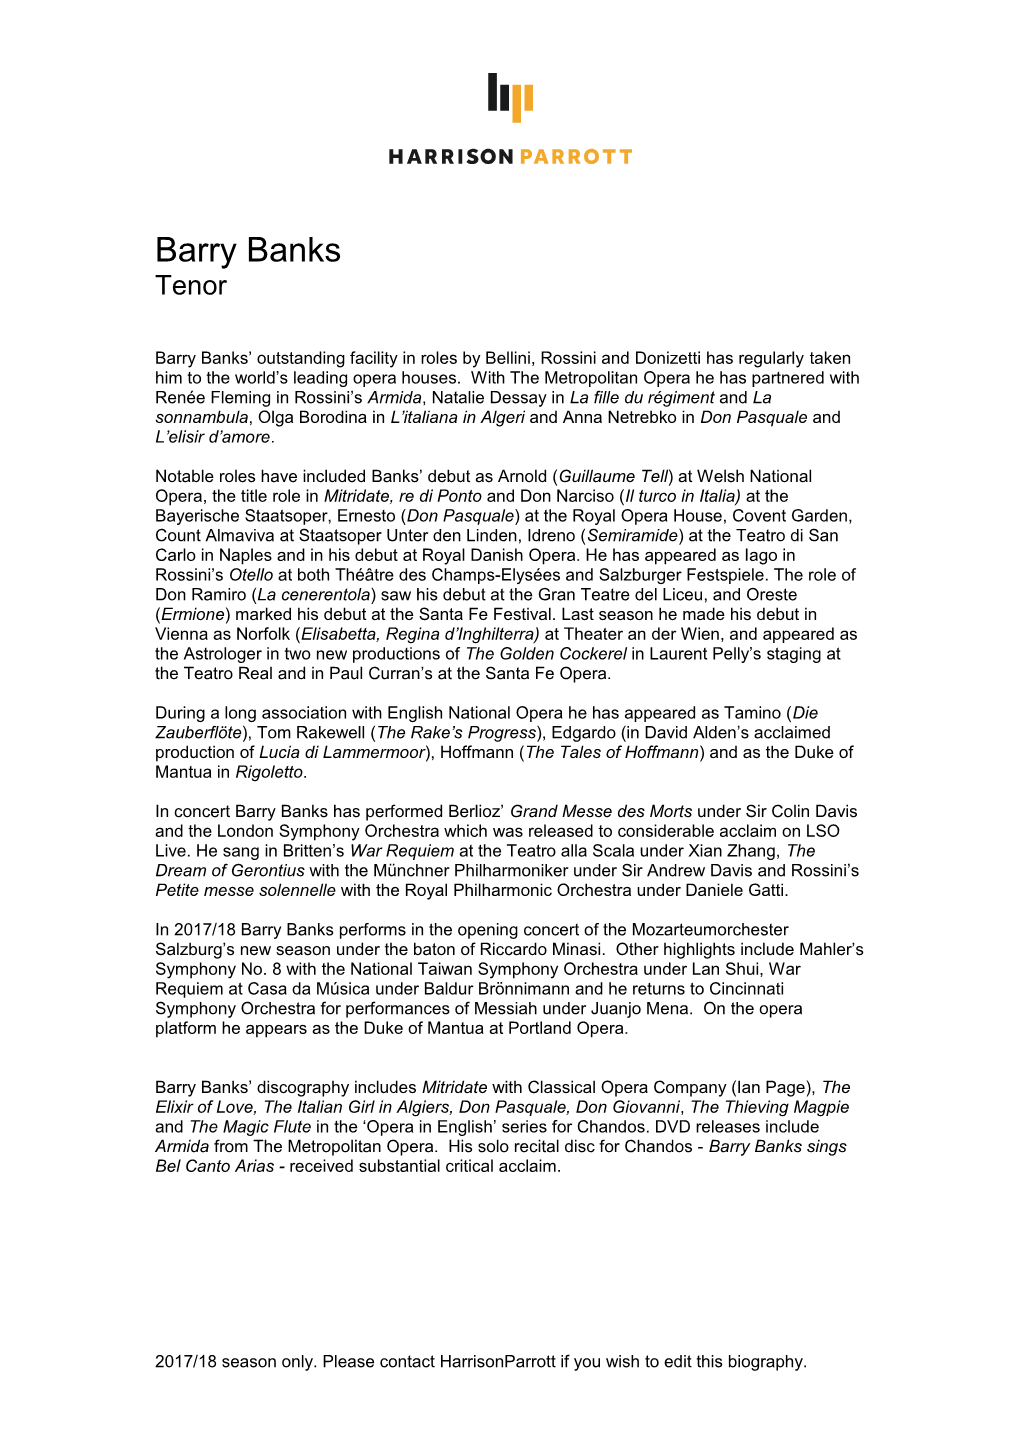 Barry Banks Outstanding Facility in Roles by Bellini, Rossini and Donizetti Has Regularly